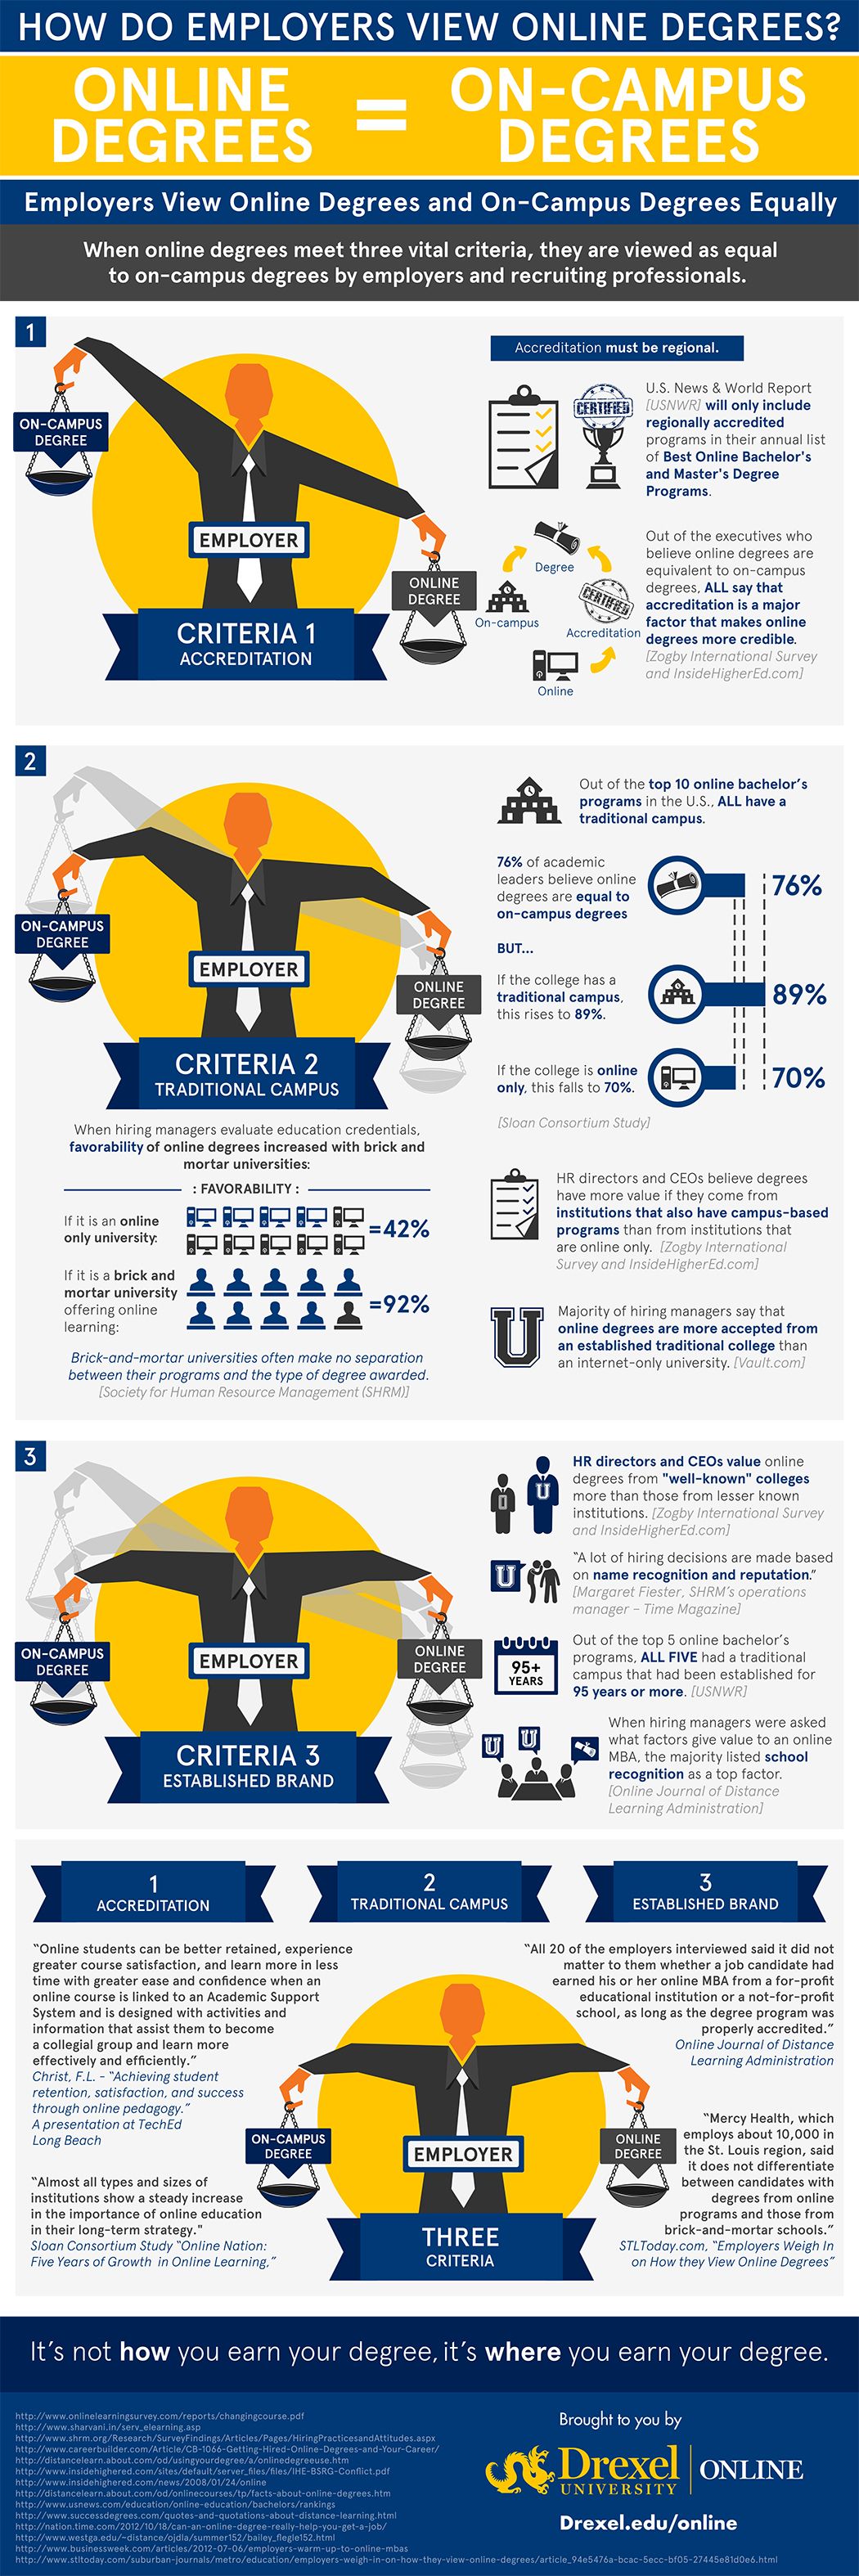 Full infographic on how employers view online degrees vs. traditional degrees created by Drexel University Online